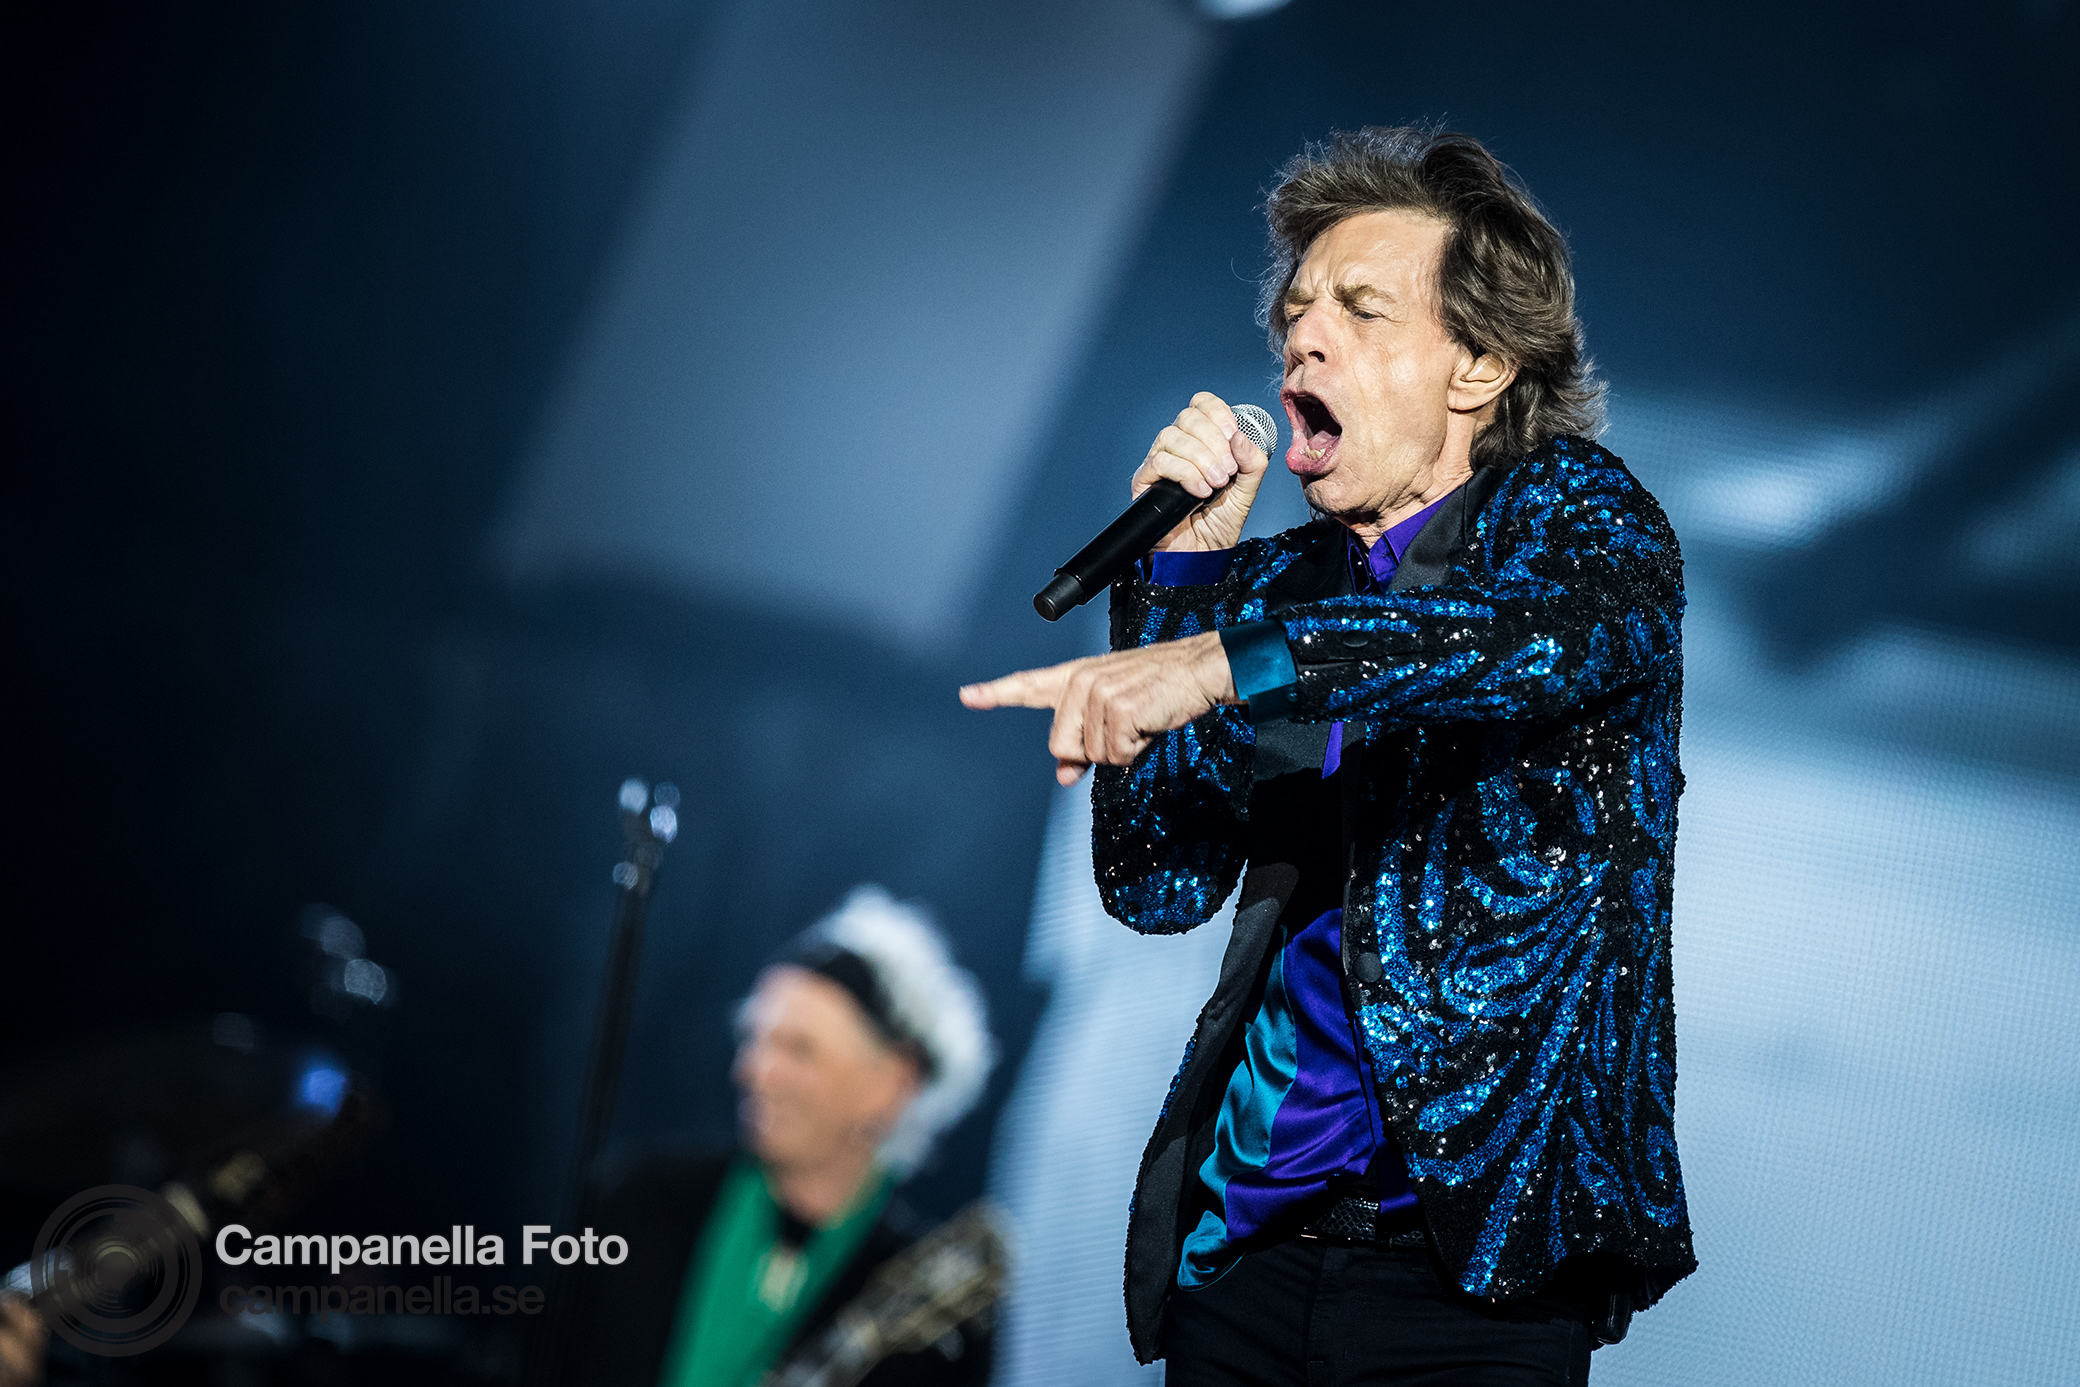 The Rolling Stones perform in Stockholm - Michael Campanella Photography